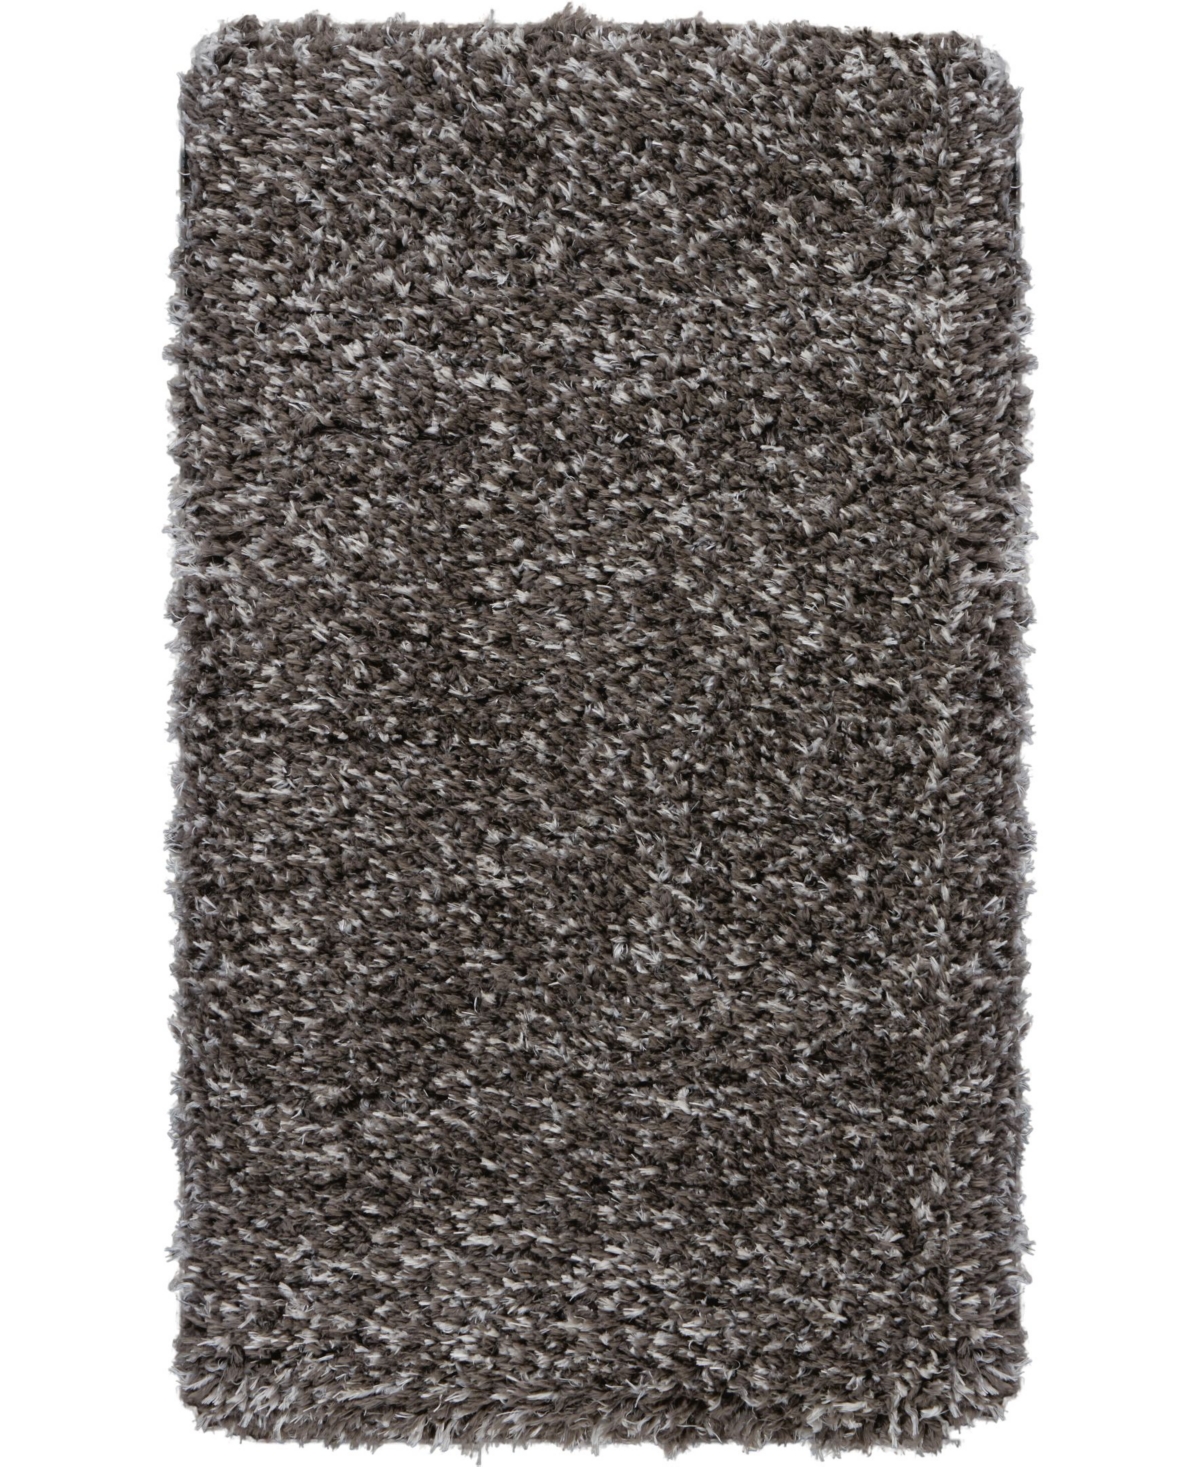 NOURISON LUXE SHAG LXS01 CHARCOAL 2'2" X 3'9" AREA RUG